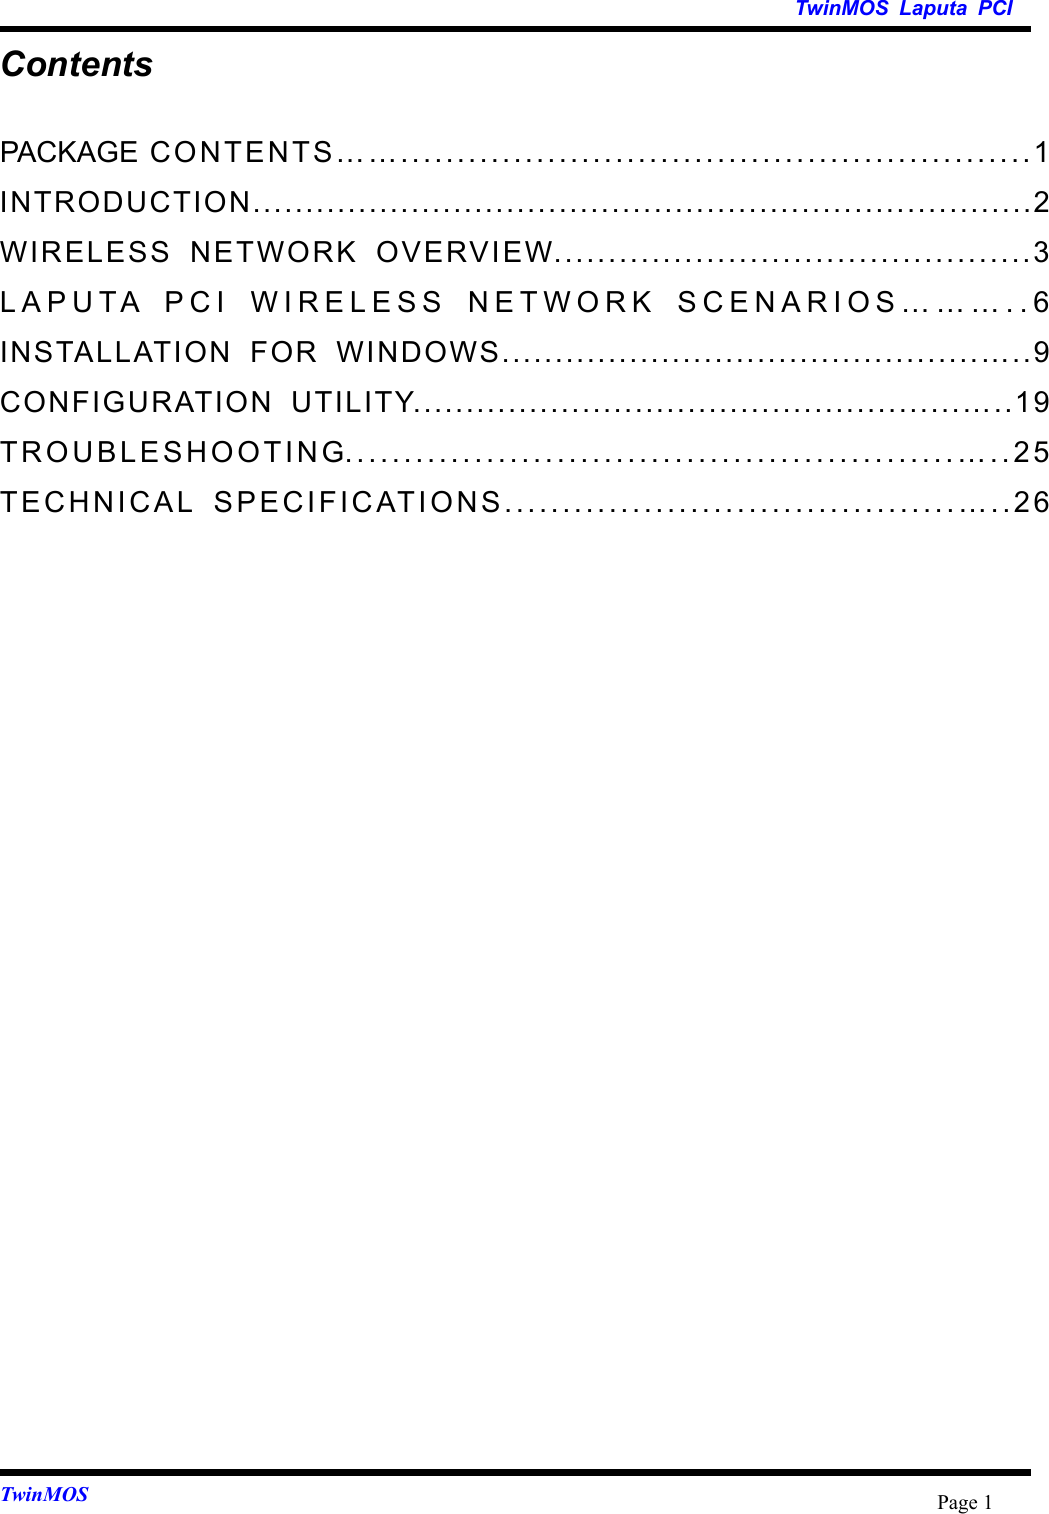   TwinMOS Laputa PCI TwinMOS  Page 1Contents PACKAGE CONTENTS……........................................................1 INTRODUCTION..........................................................................2 WIRELESS NETWORK OVERVIEW............................................3 LAPUTA PCI WIRELESS NETWORK SCENARIOS………..6 INSTALLATION FOR WINDOWS.............................................…..9 CONFIGURATION UTILITY....................................................…..19 TROUBLESHOOTING....................................................…..25 TECHNICAL SPECIFICATIONS.......................................…..26  